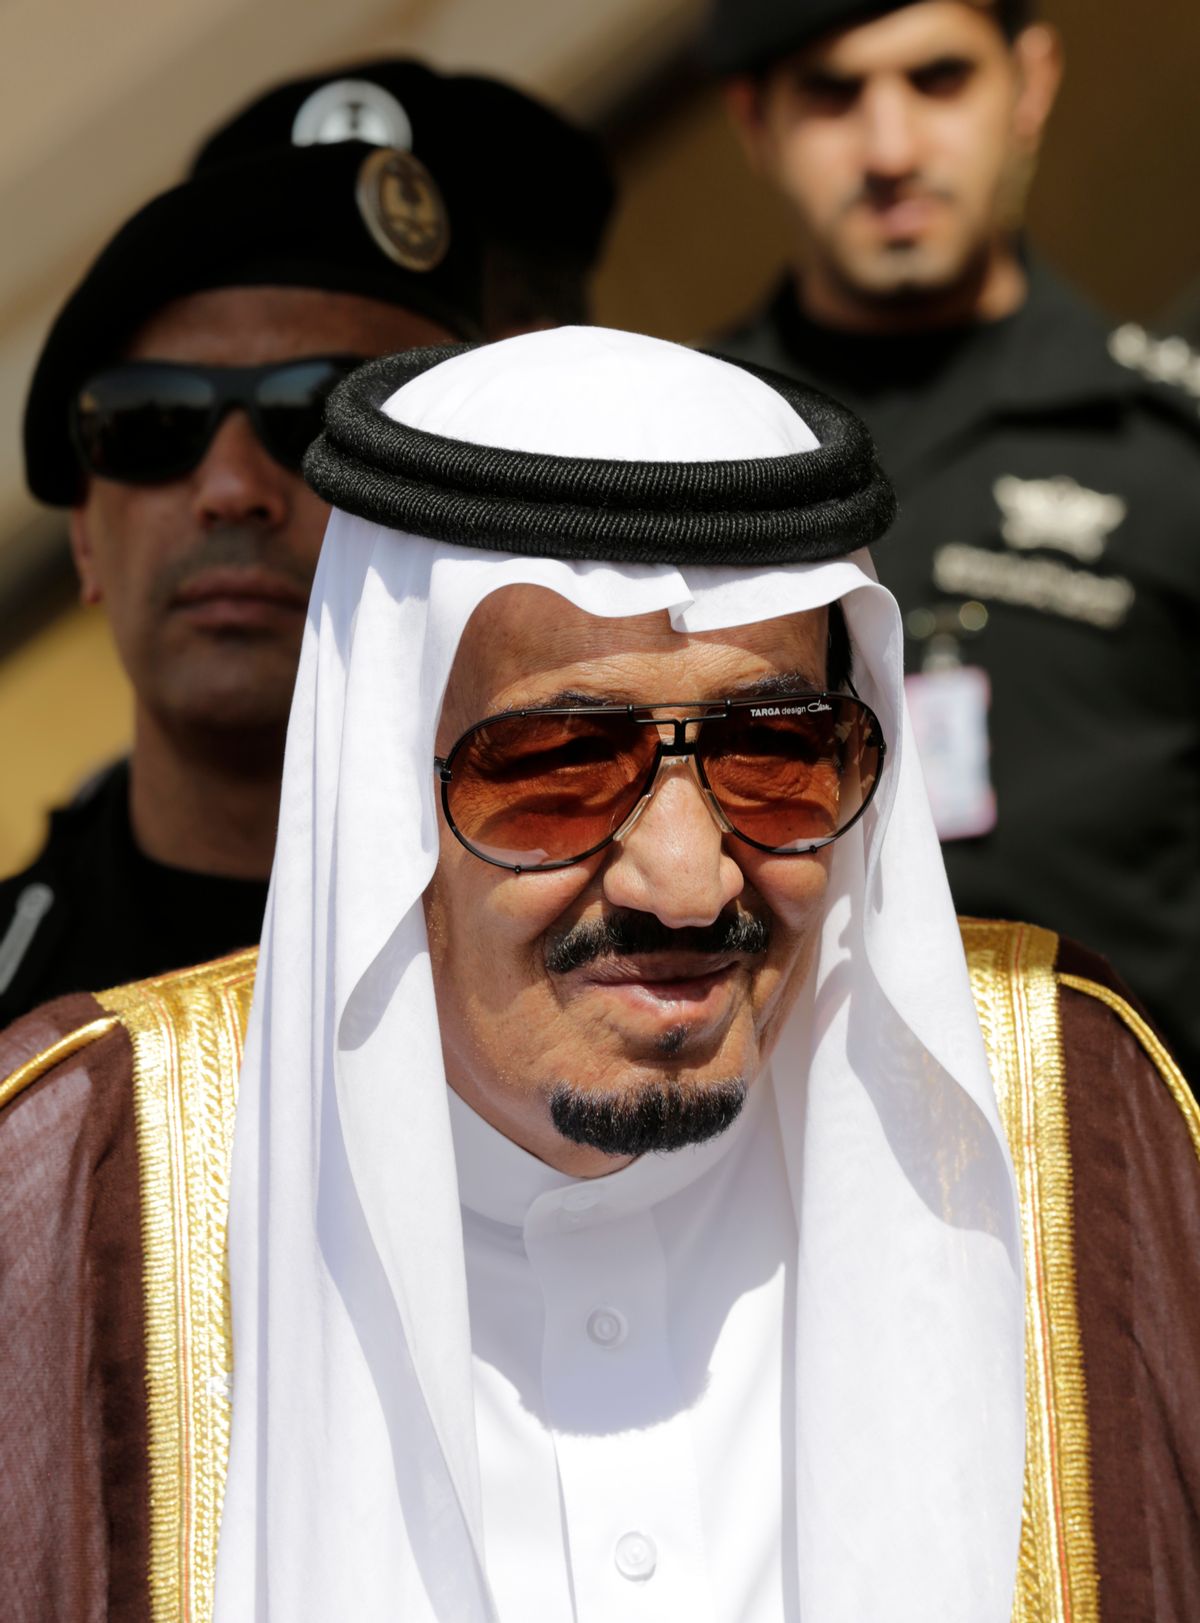 FILE -- In this Nov. 10, 2015 file photo, King Salman of Saudi Arabia waits to receive leaders during their arrival to participate in a summit of Arab and South American leaders in Riyadh, Saudi Arabia. Within hours of ascending to the Saudi throne, King Salman announced sweeping changes that would recast the kingdoms line of succession, and rework its security and economic decision-making processes. It marked the start of what would be a tumultuous year for King Salman, who completes one year as monarch on Saturday, Jan. 23, 2016. () (AP Photo/Hasan Jamali, File)